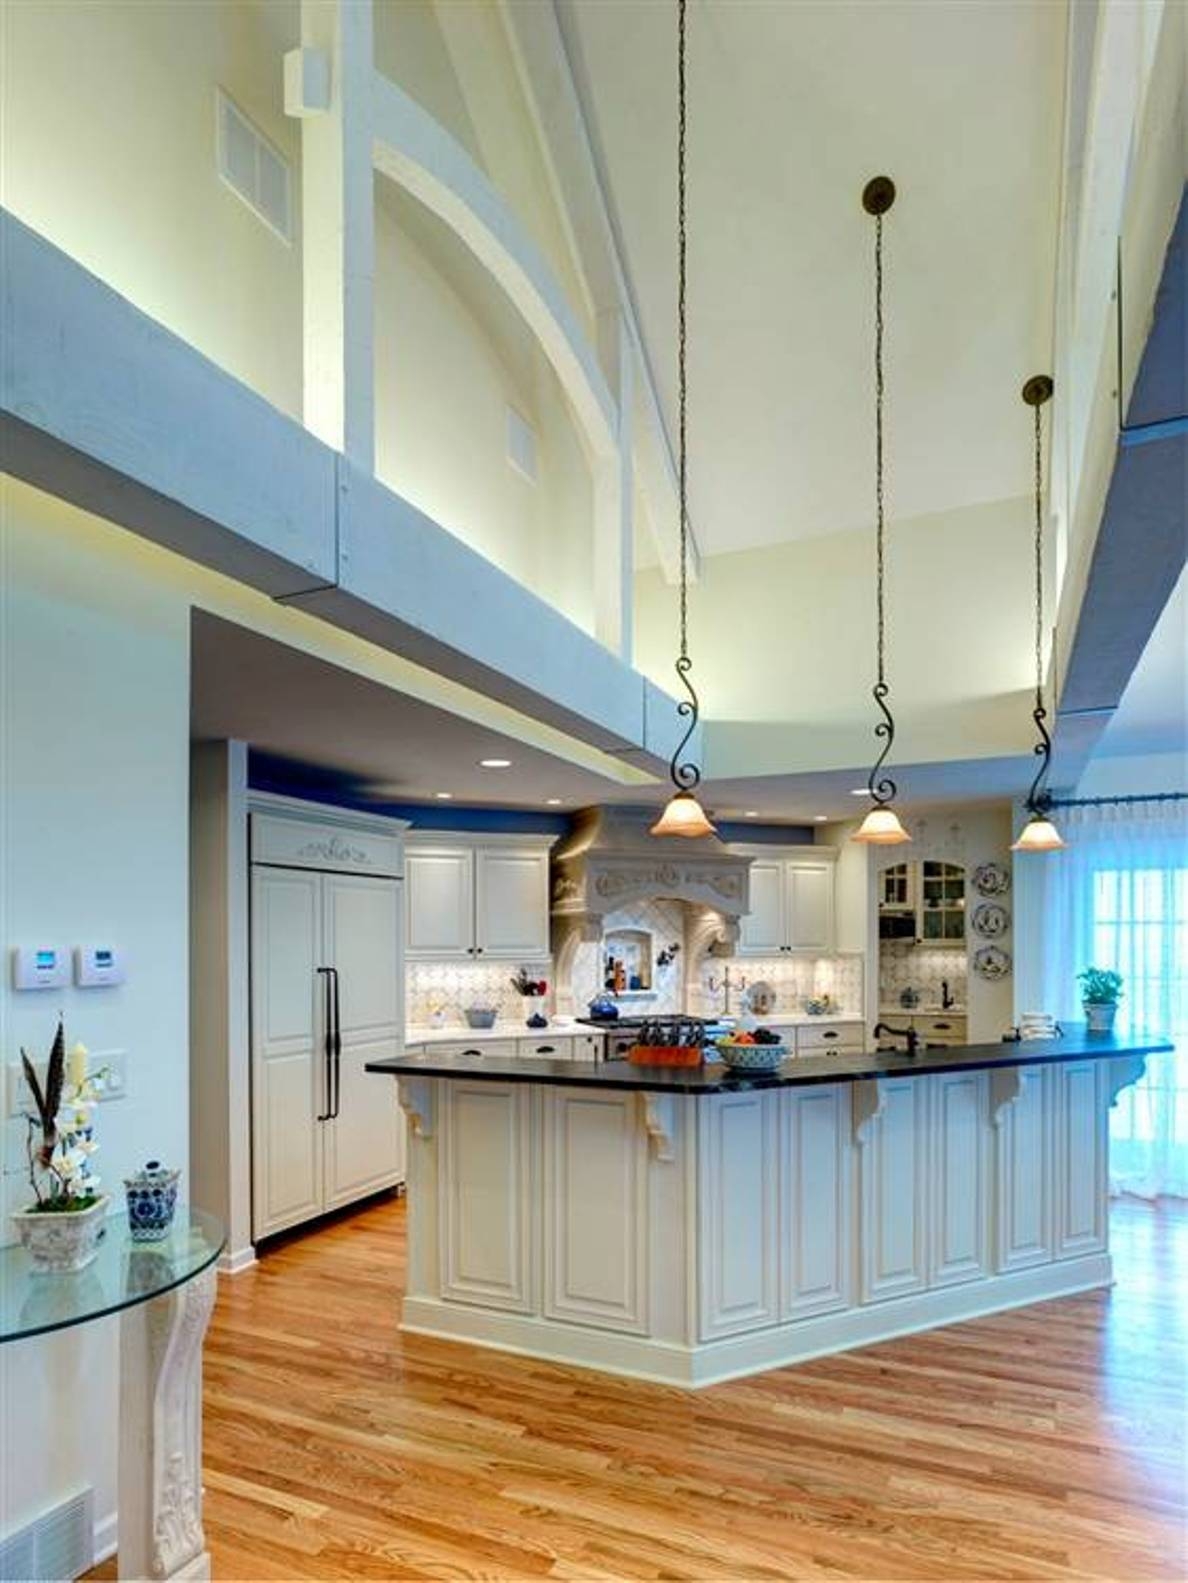 Permalink to High Ceiling Kitchen Lighting Ideas